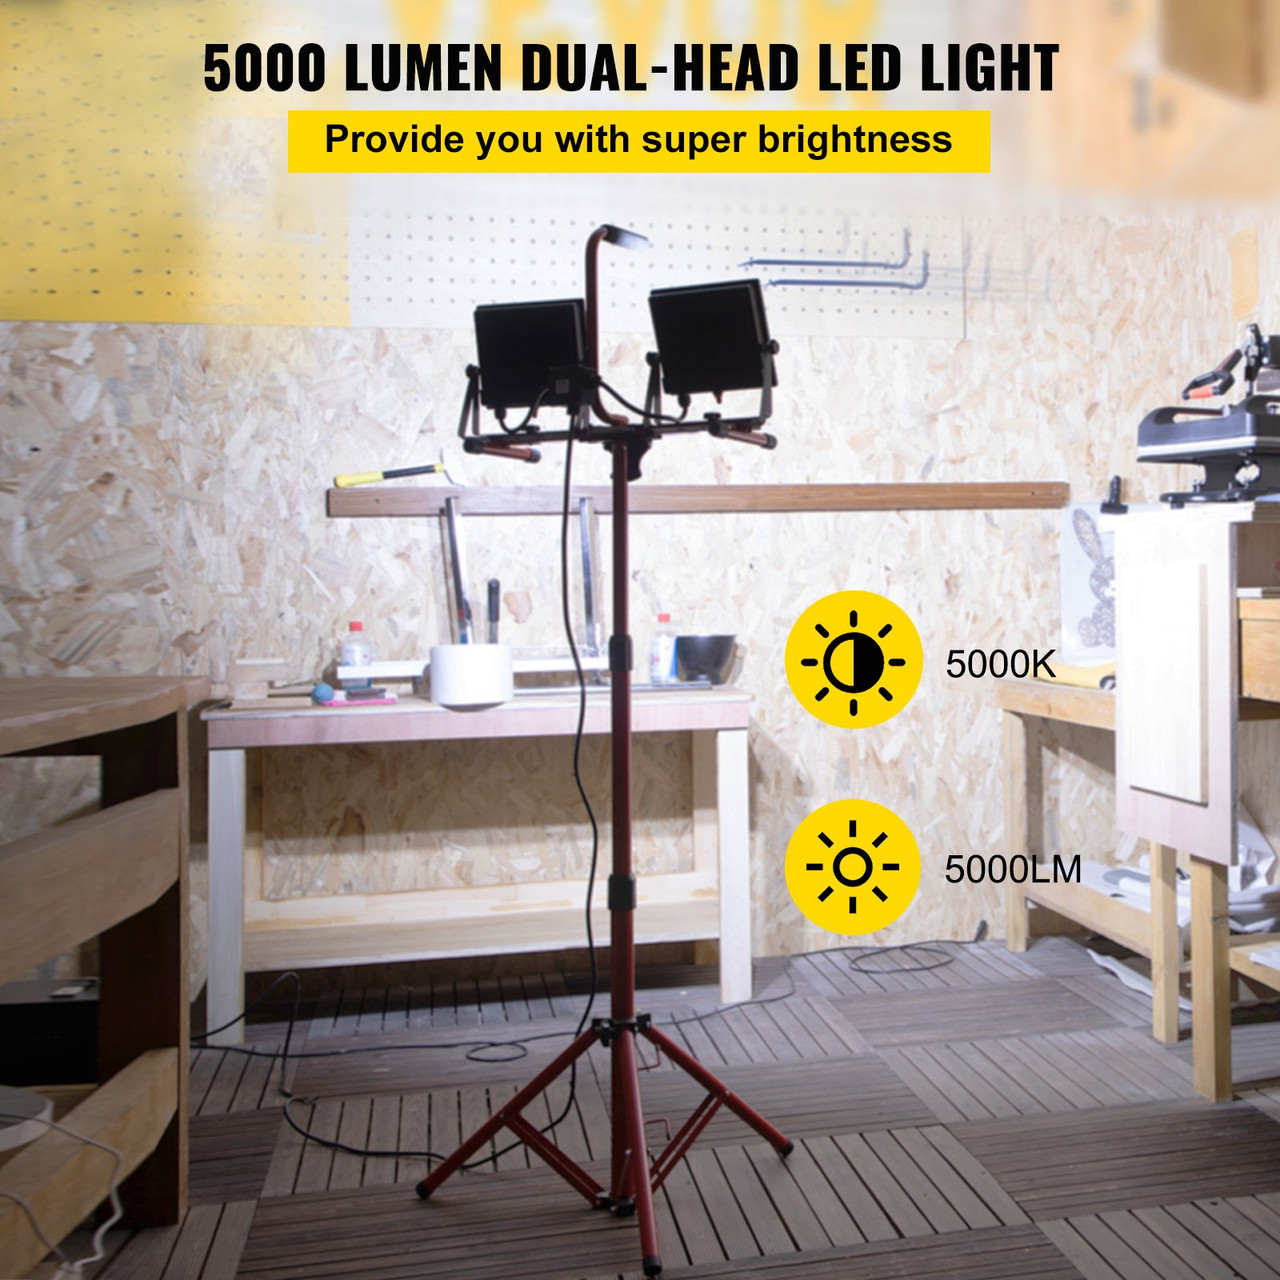 LED Work Light with Stand, 5000 Lumen Dual-head LED Work Light with 27.6"-68.1" Adjustable and Foldable Tripod Stand, IP65 Waterproofed LED Tripod